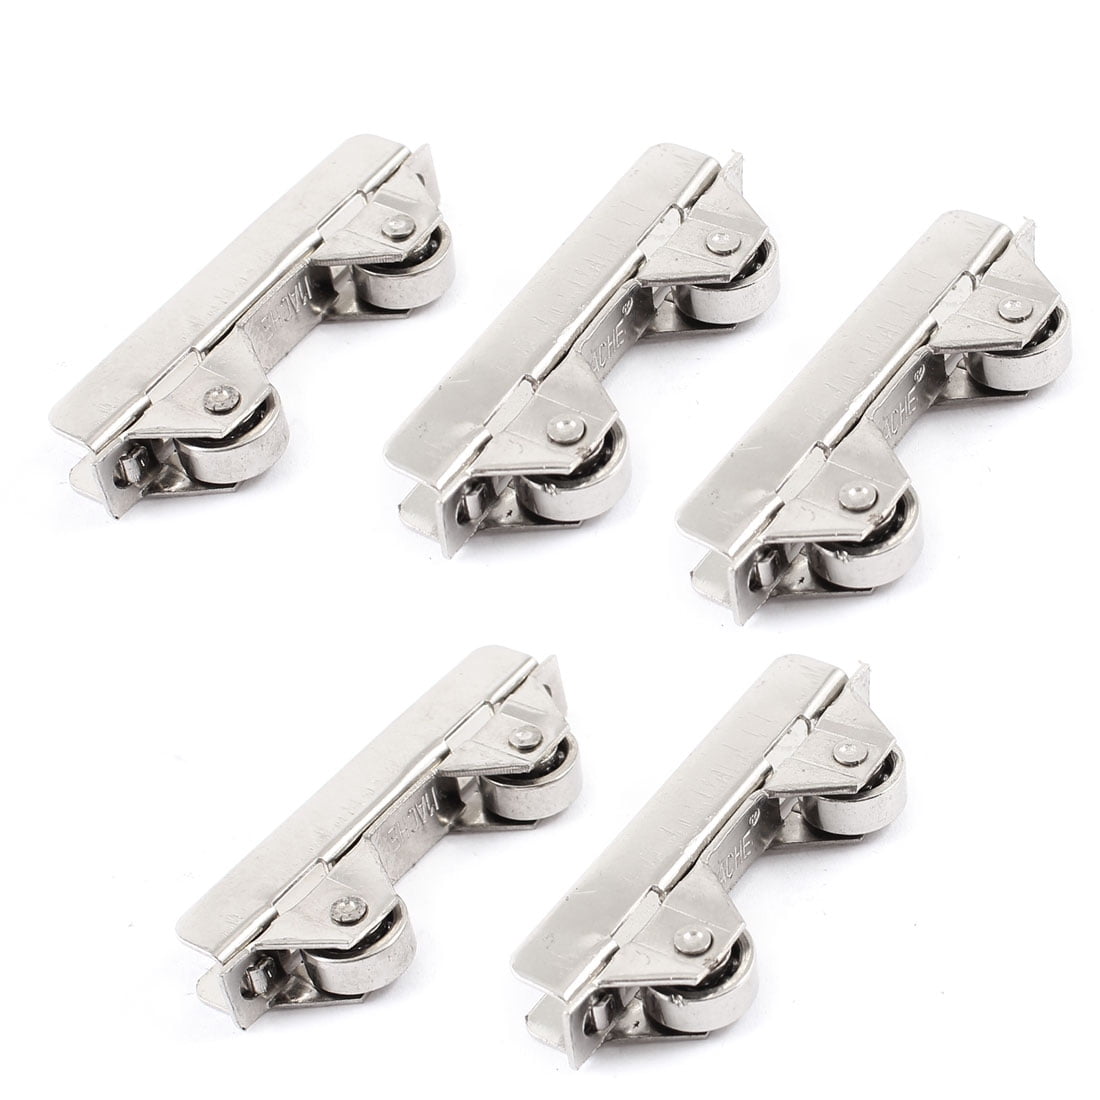 uxcell Double wheels Metal Sliding Door Roller Pulley Silver Tone 4pcs for 6mm Glass